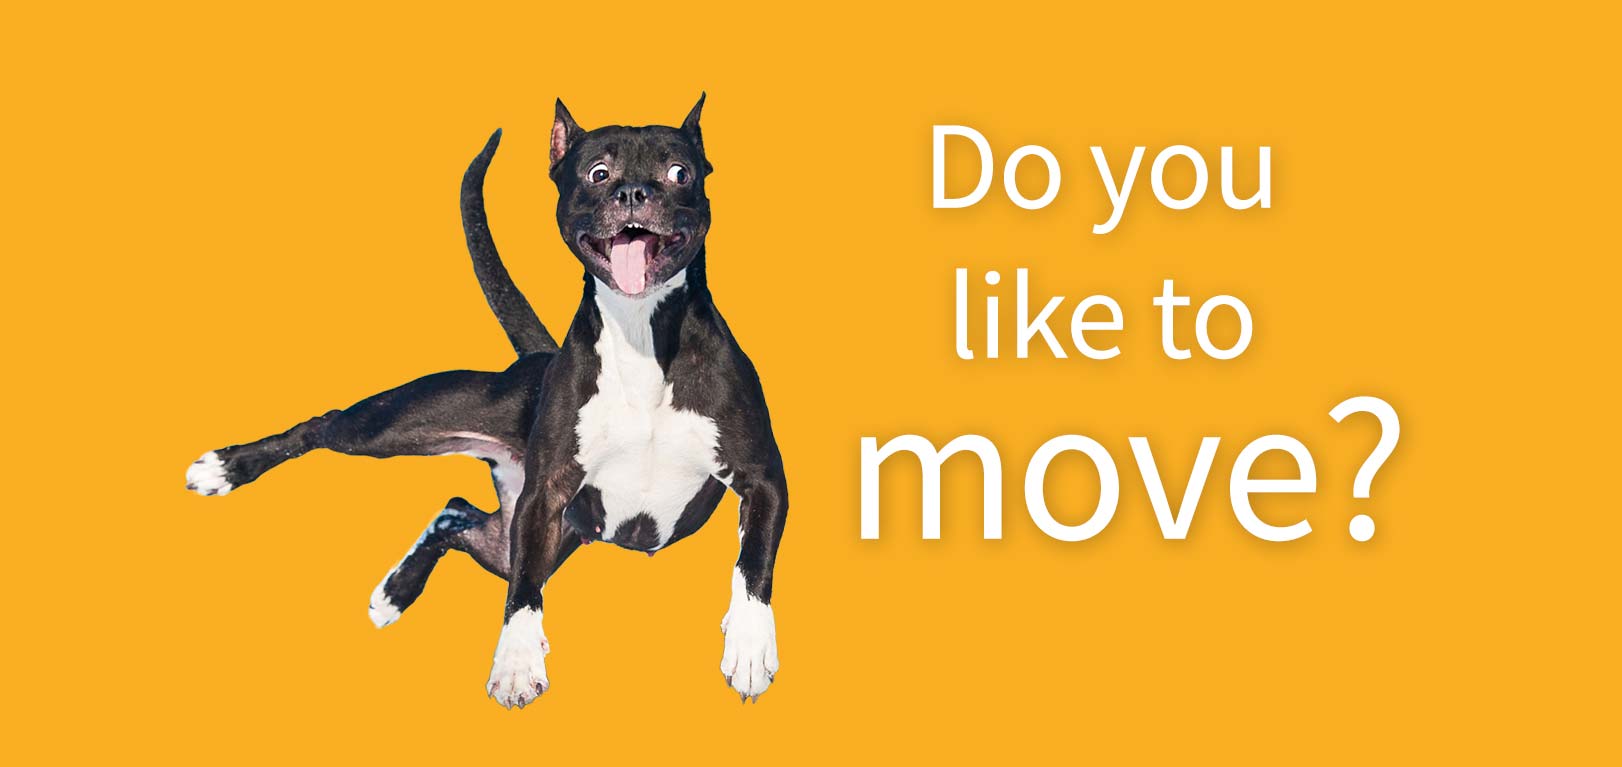 Do you Like to move it?